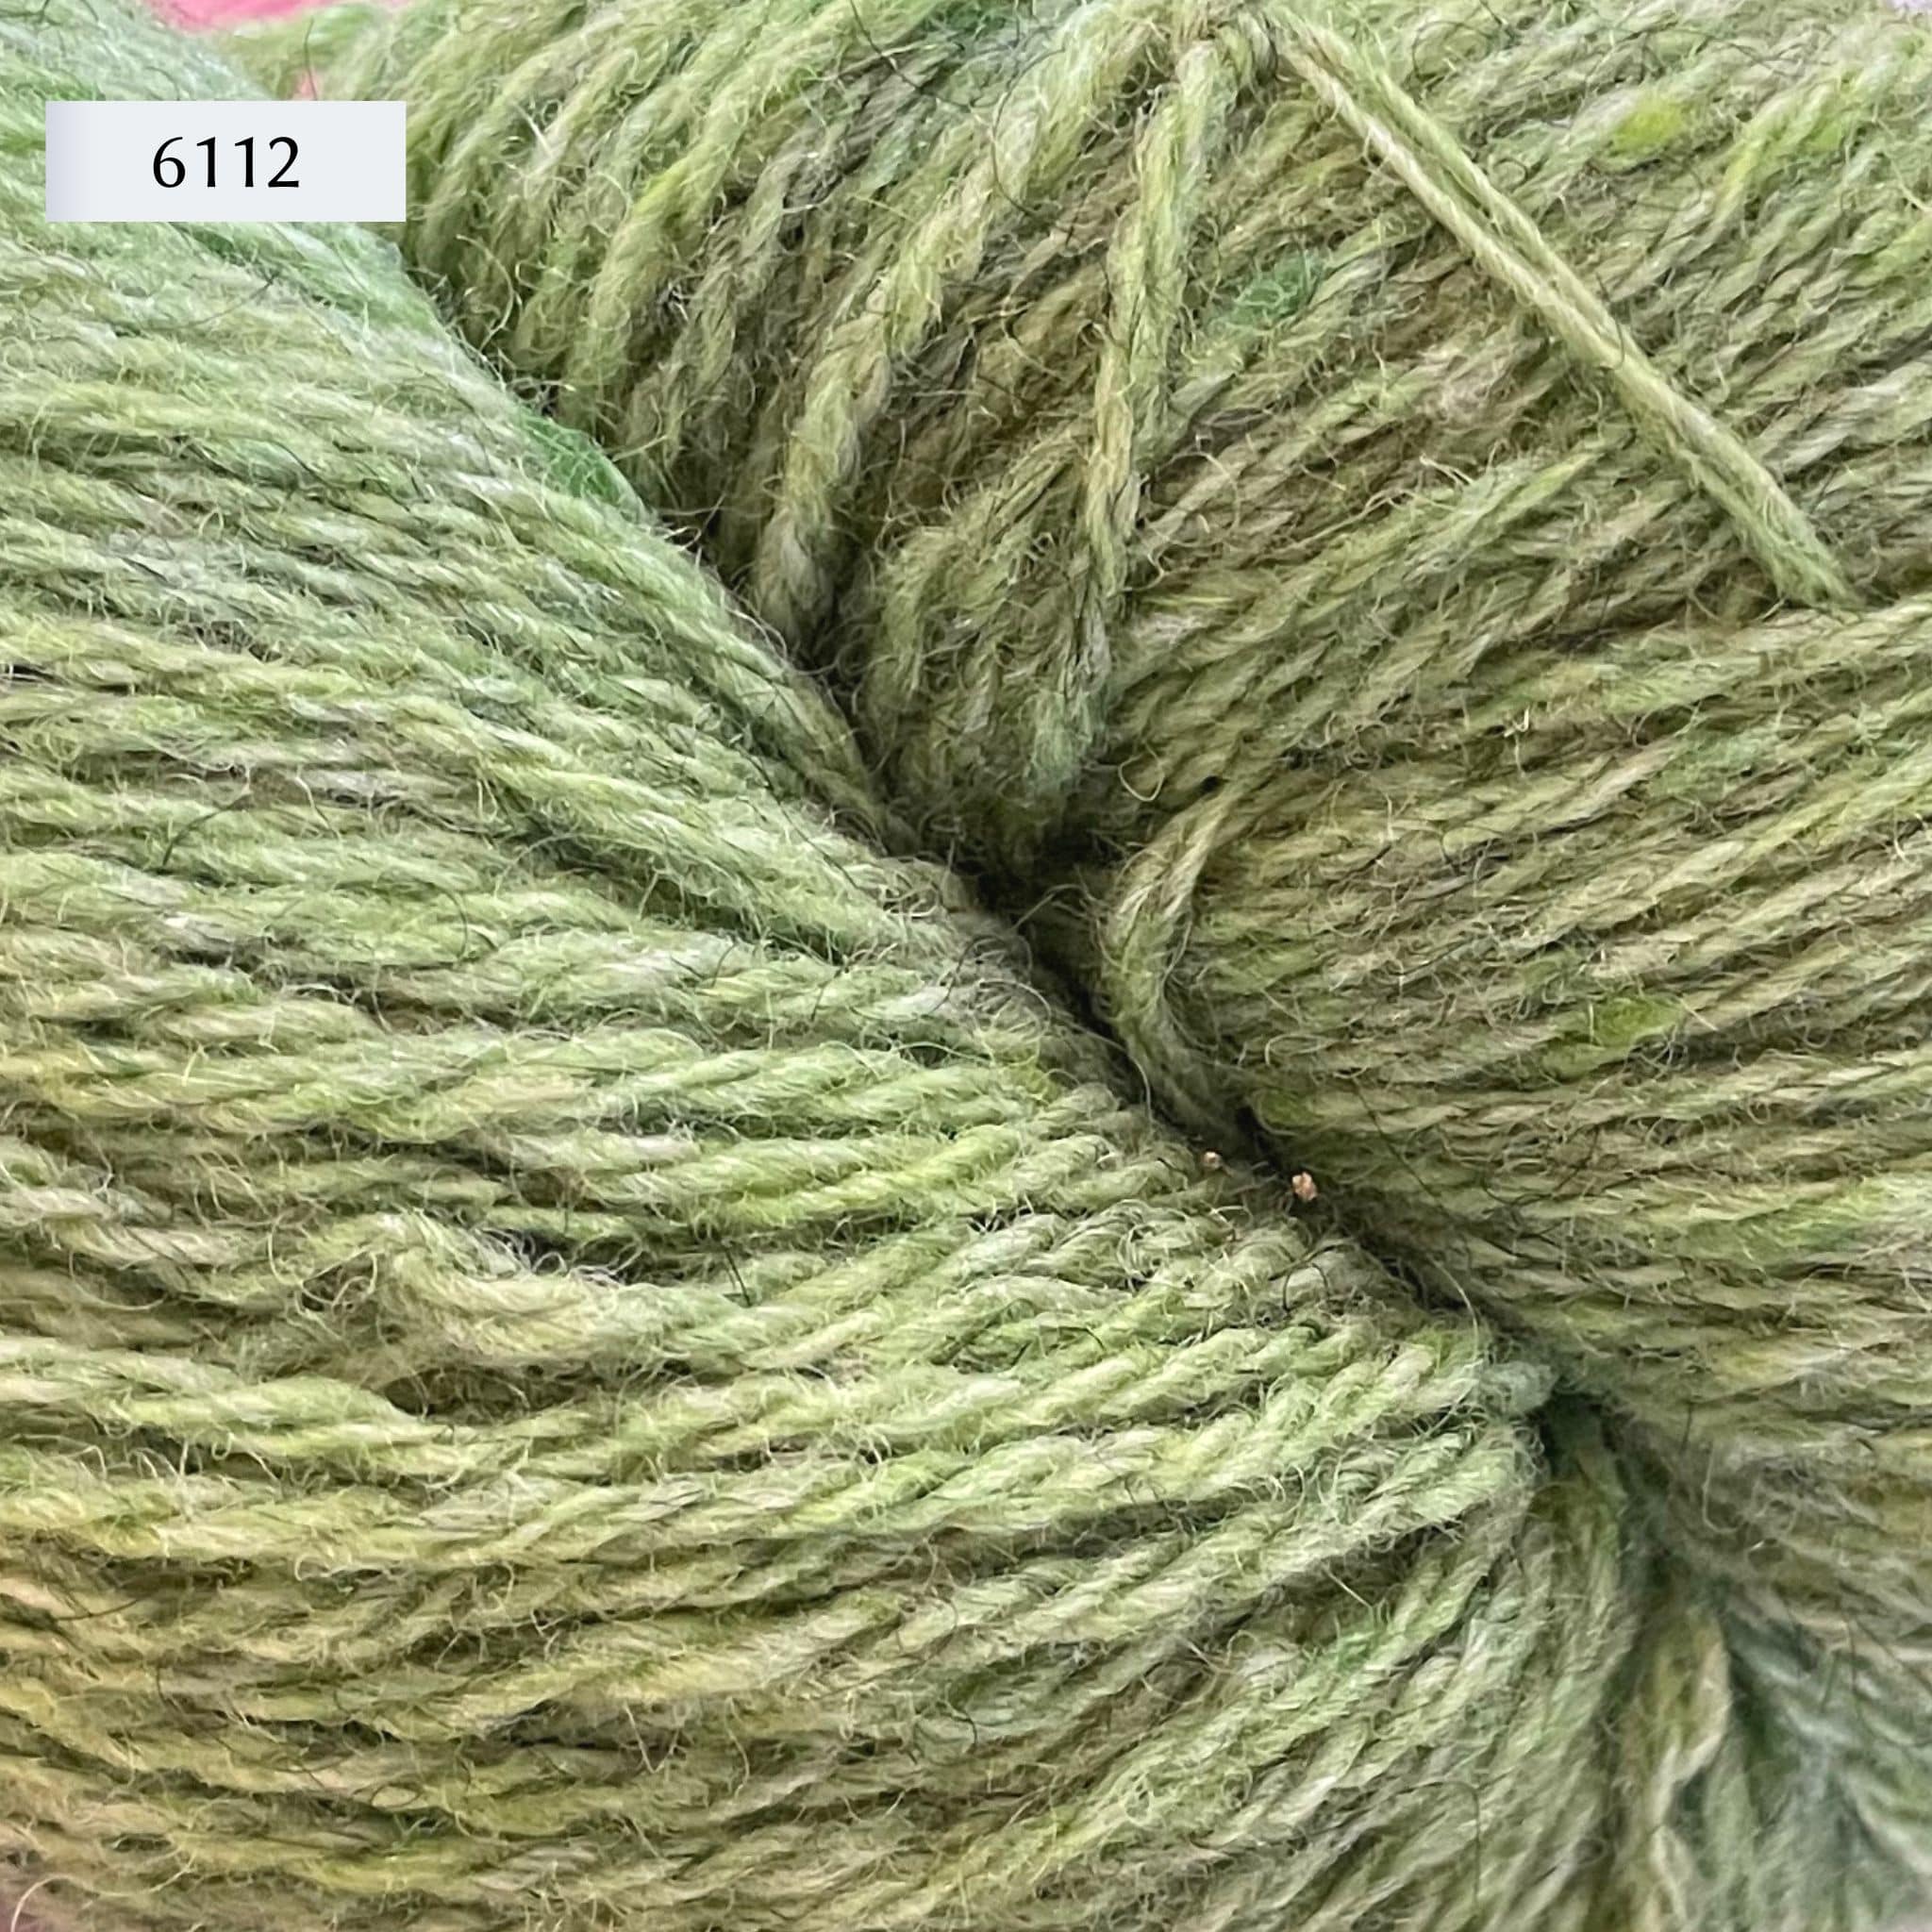 Forest Green Wool Yarn 100g./3,50 Oz. New Zealand Wool for Hand or Machine  Knitting, Weaving Plaids, Cardigans, Knitter Gift 350 Color 